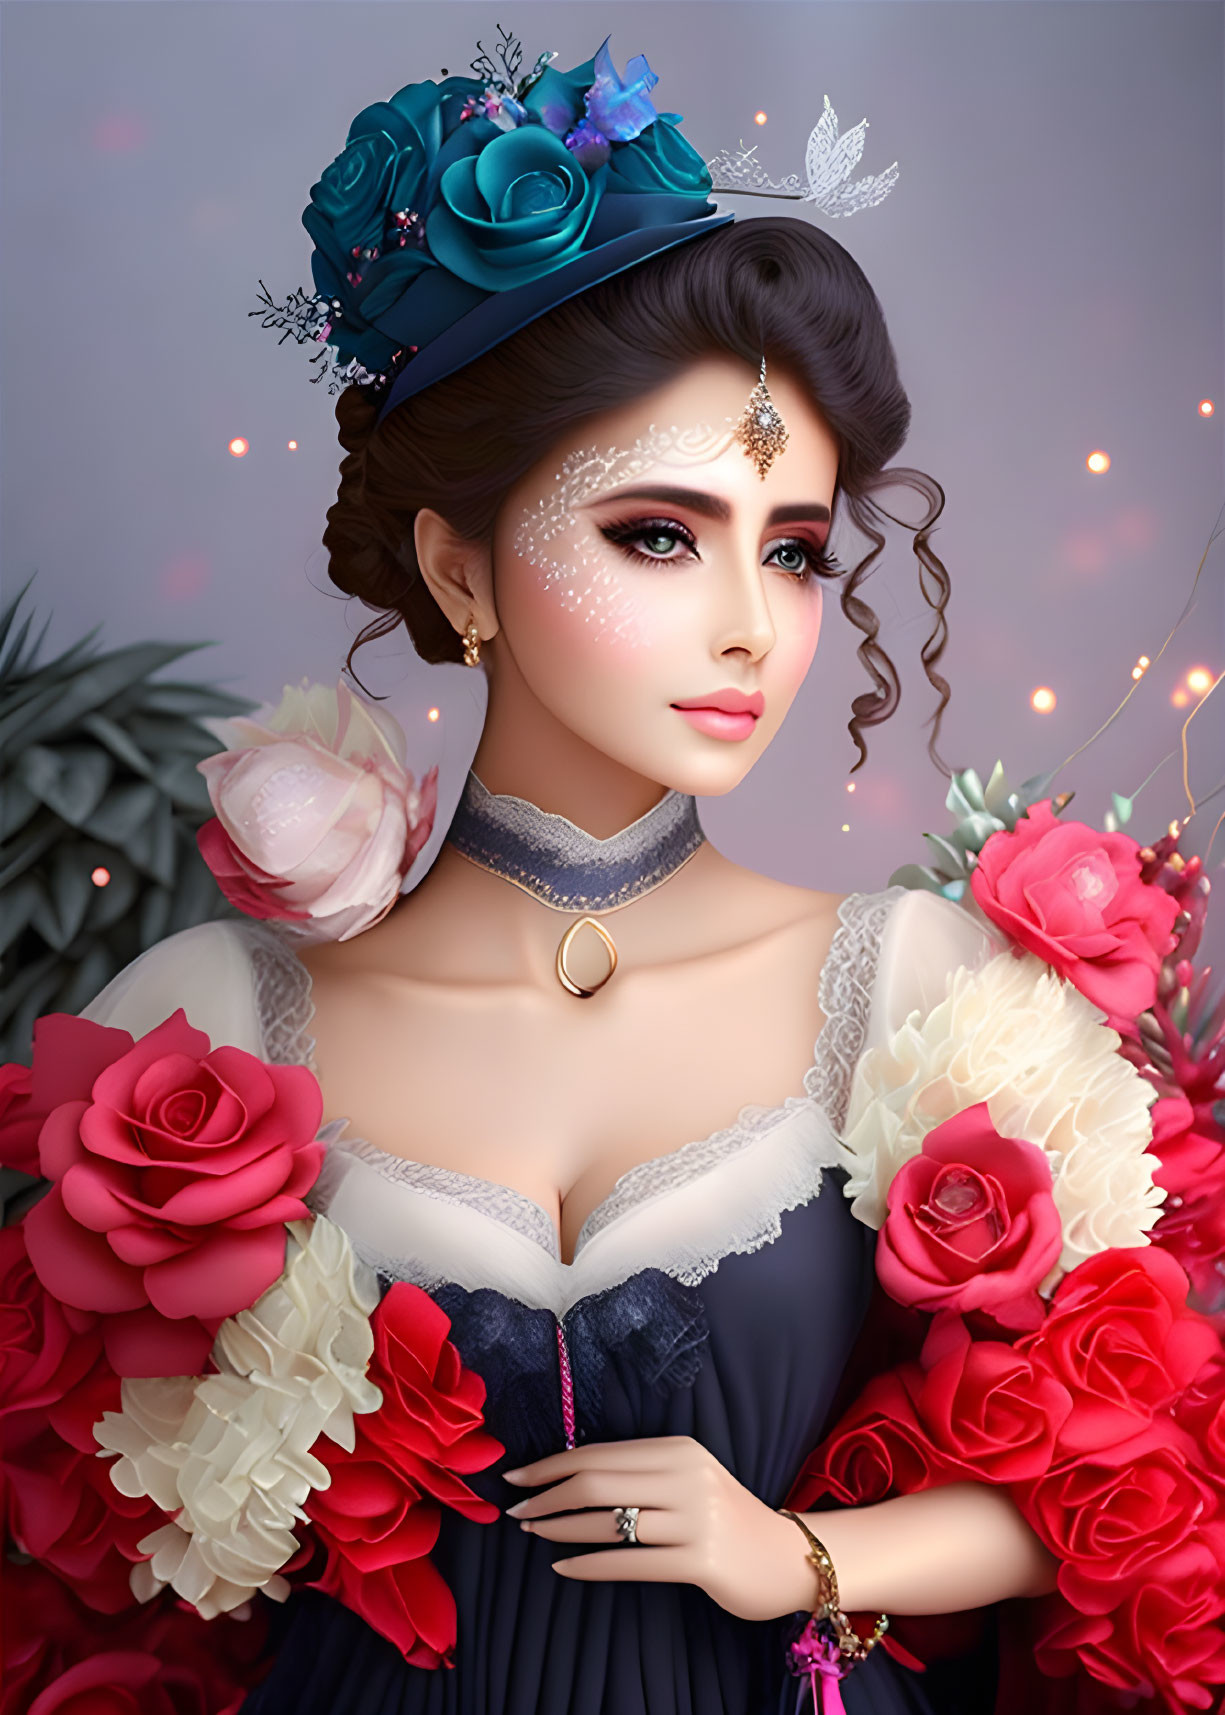 Victorian-style woman in blue and red rose attire on floral backdrop